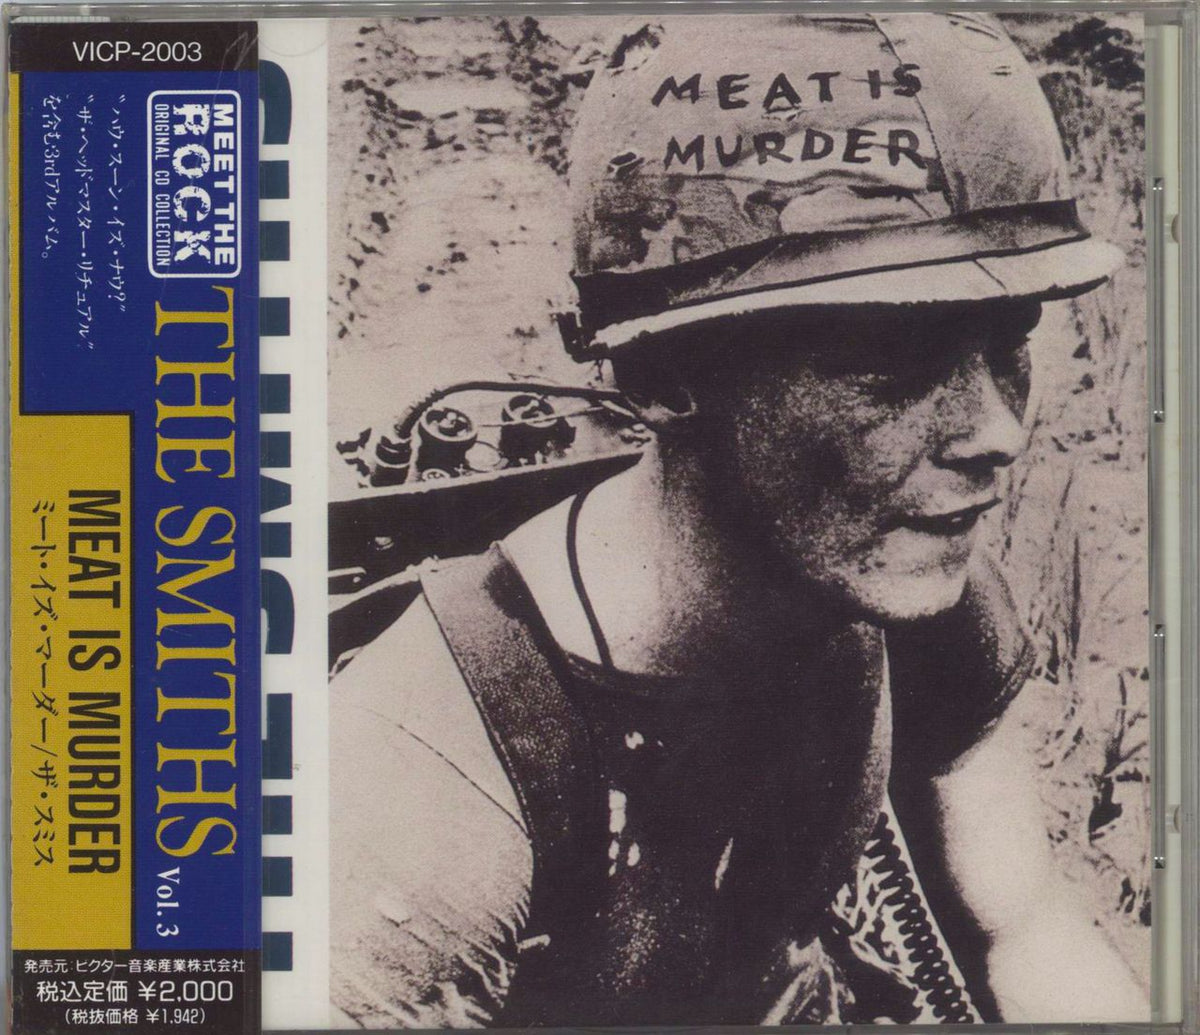 The Smiths Meat Is Murder + Obi & Sealed Japanese Promo CD album